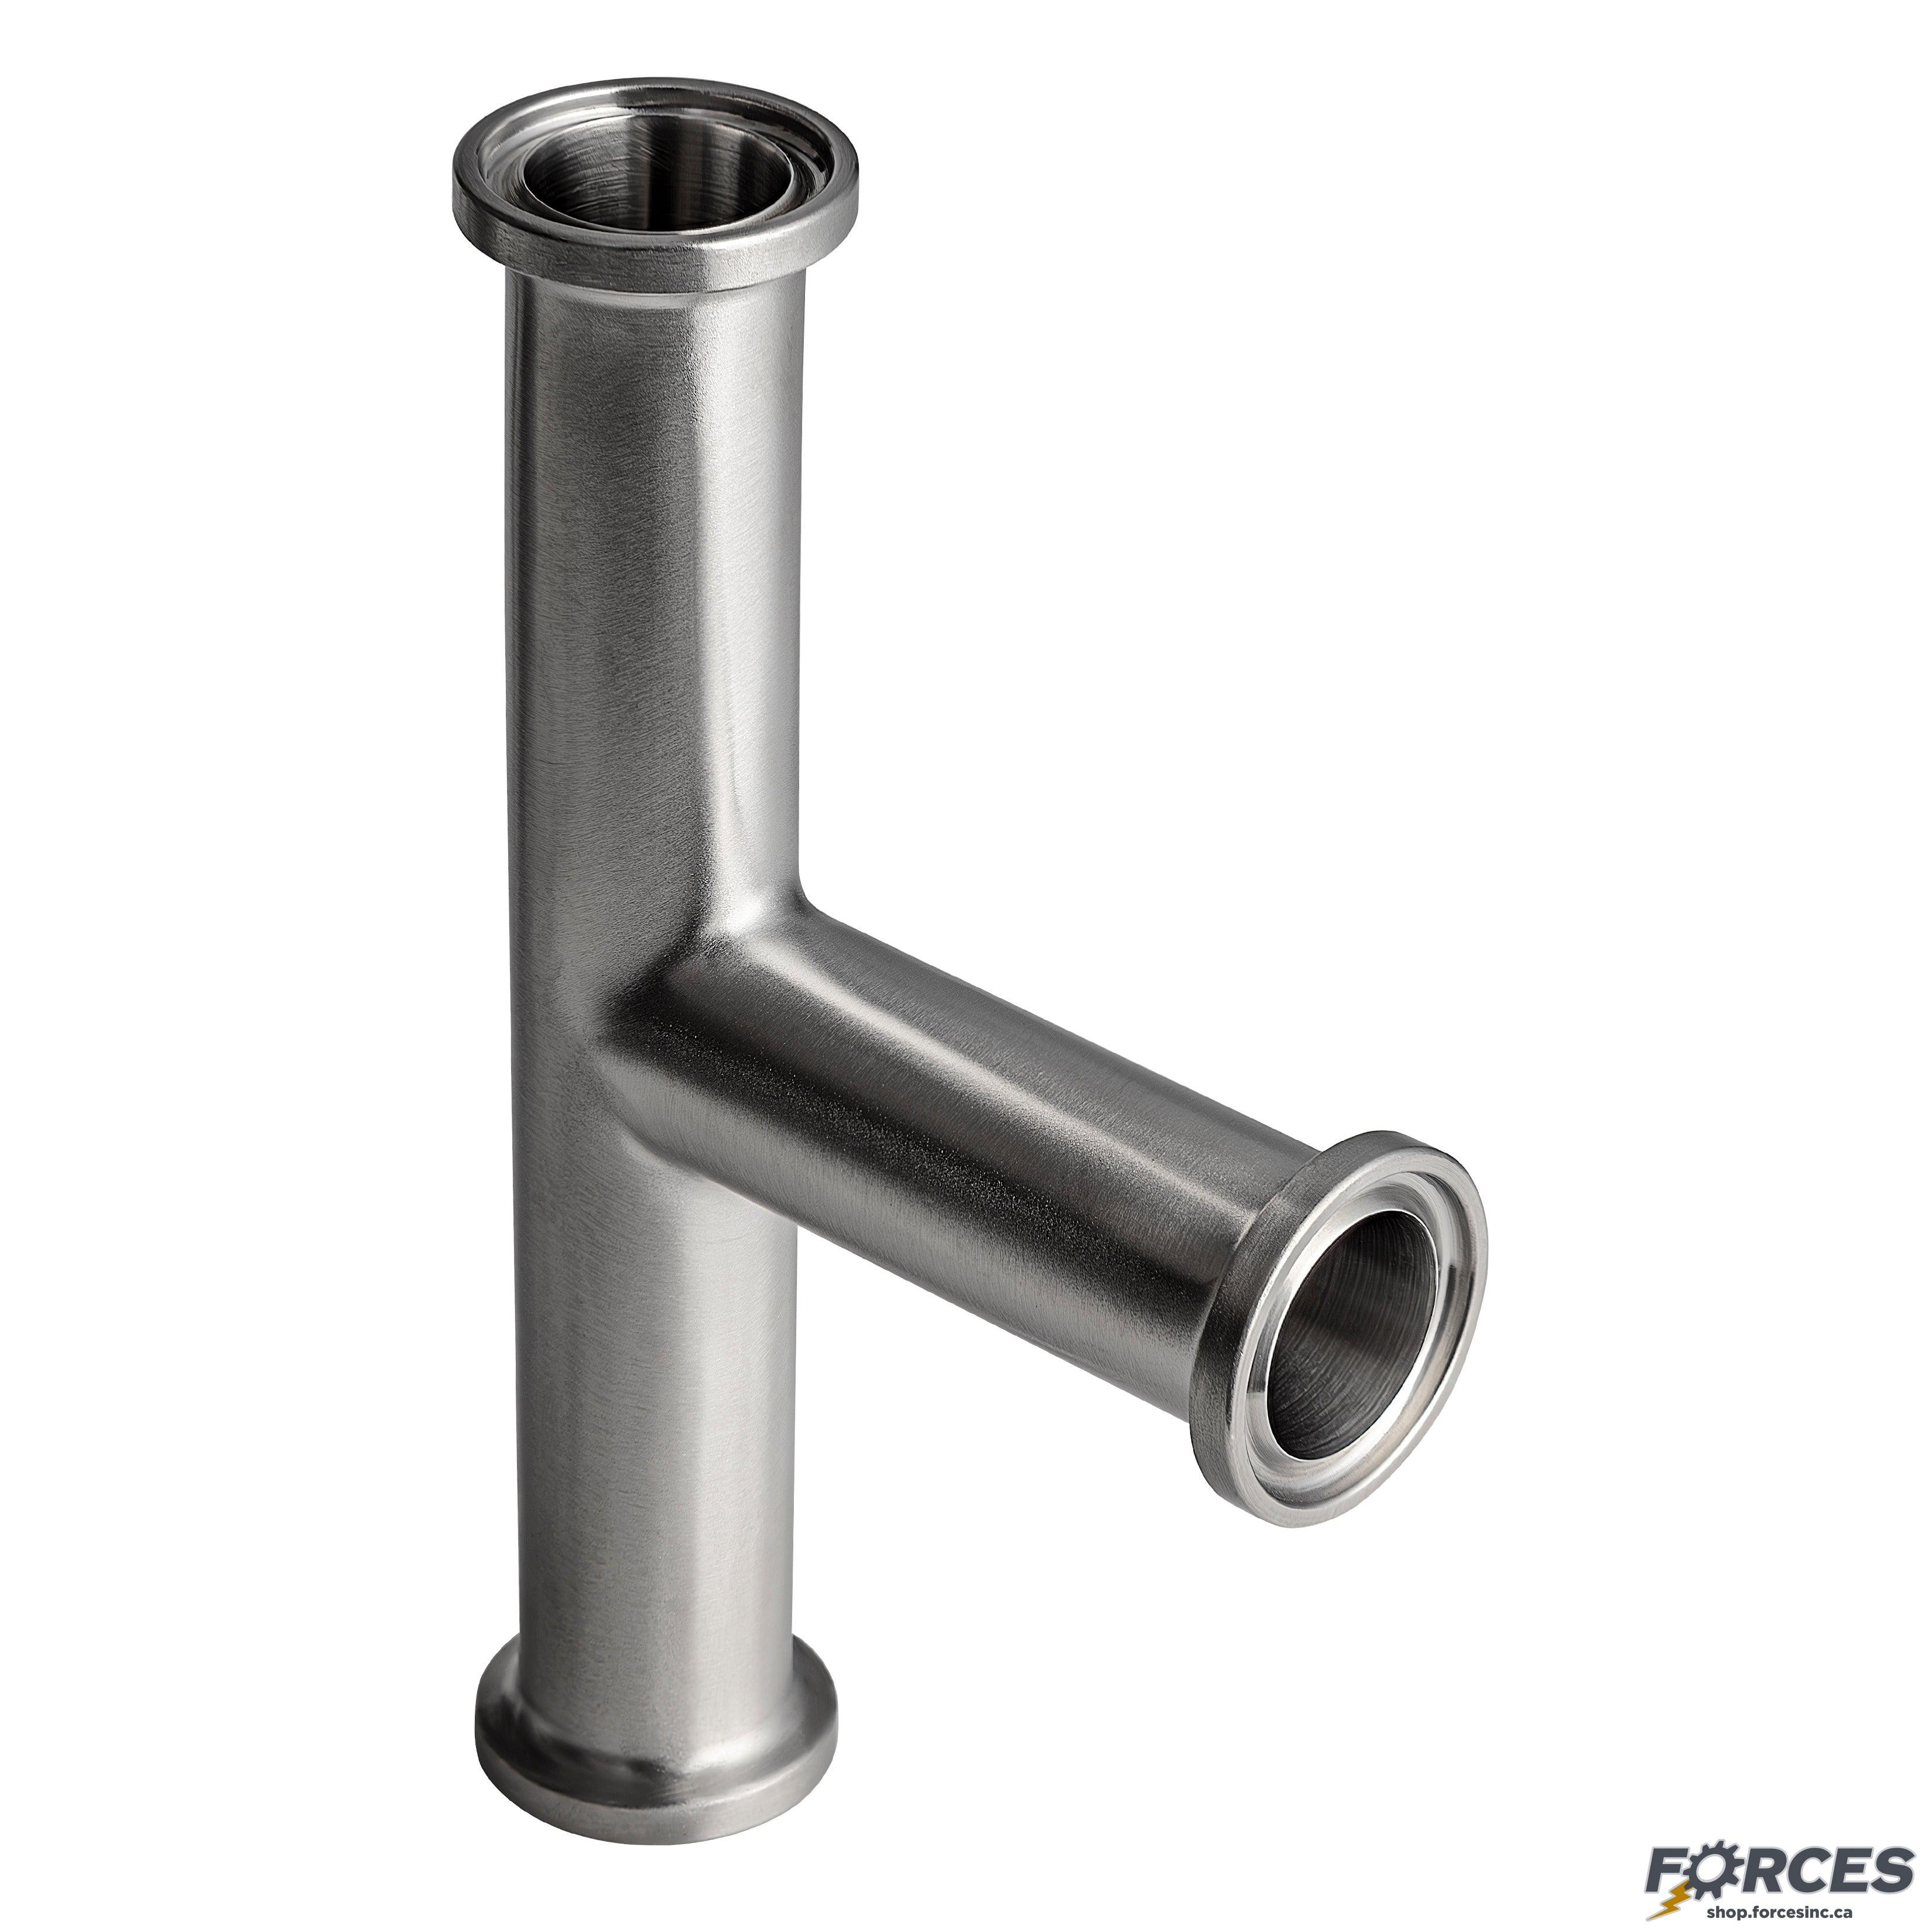 3" Tri-Clamp Tee - Stainless Steel 304 - Forces Inc